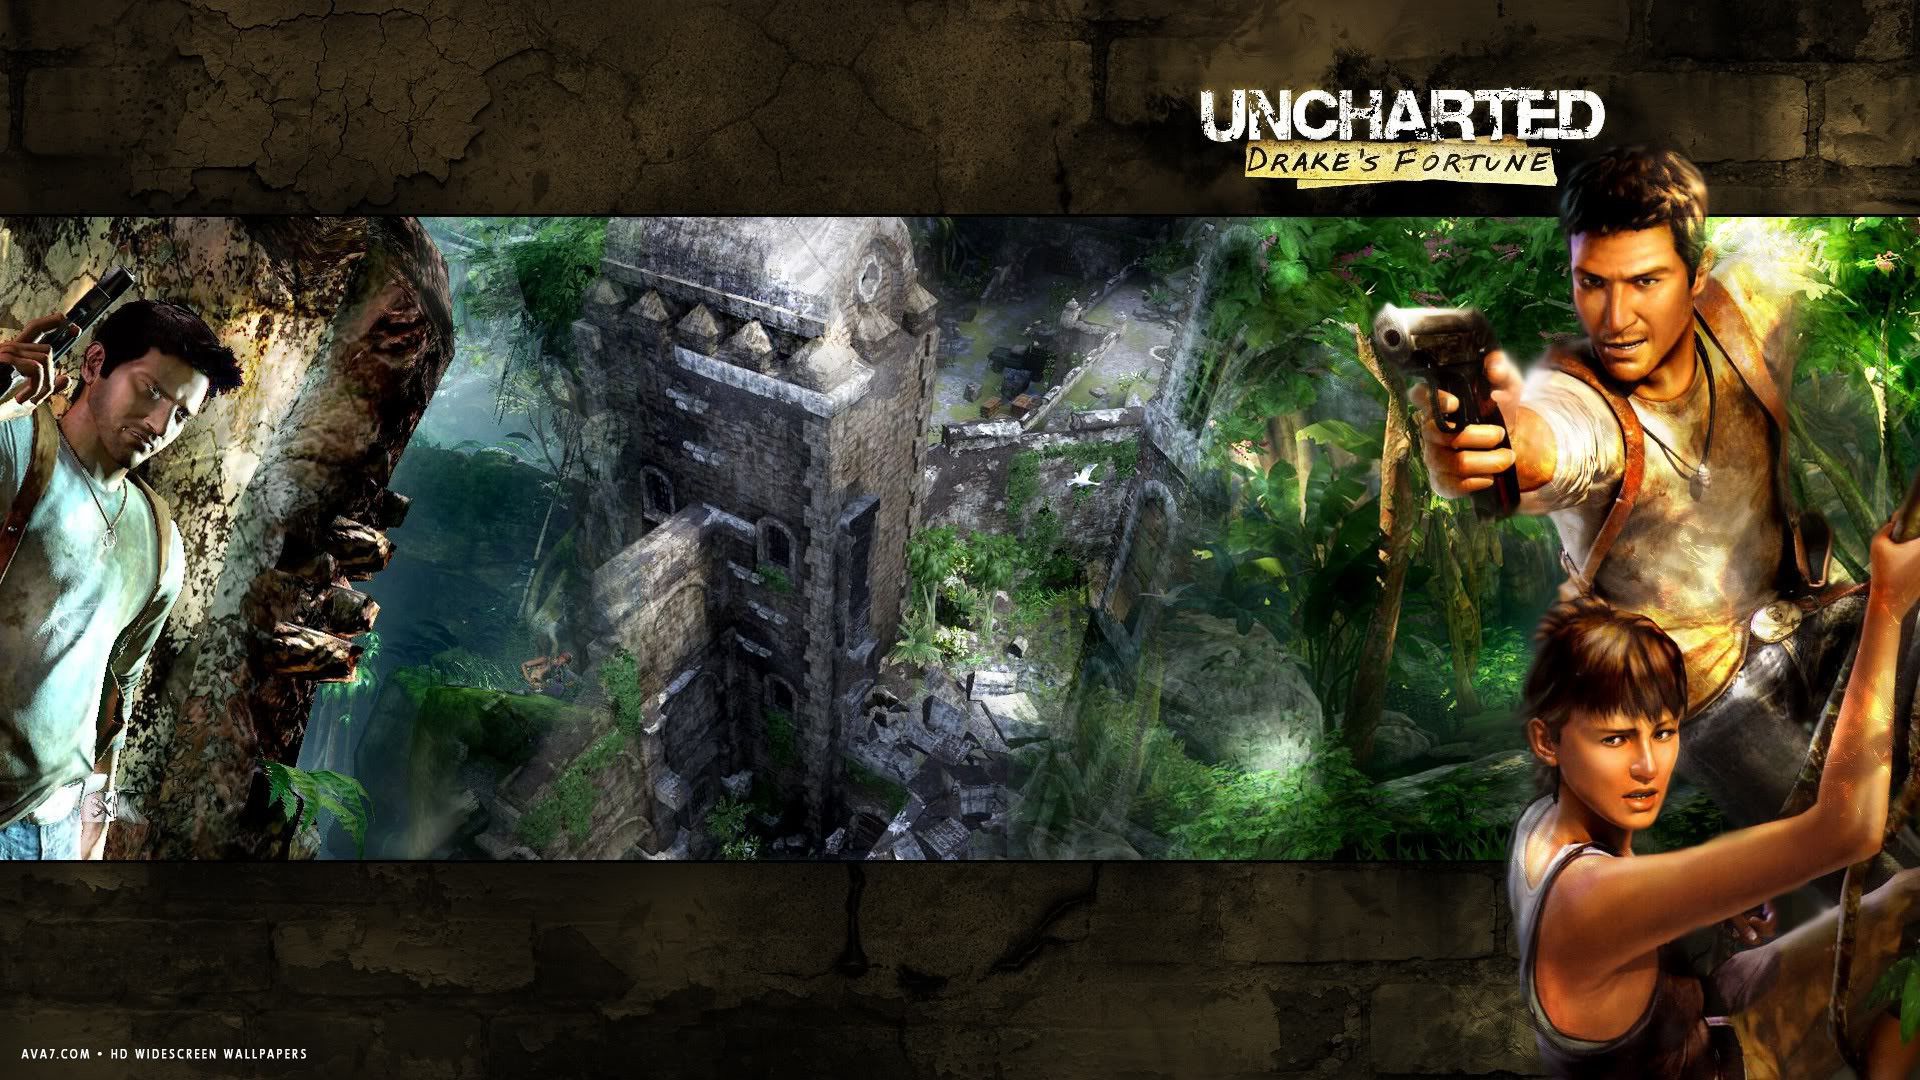 uncharted drakes fortune game HD widescreen wallpaper / games background